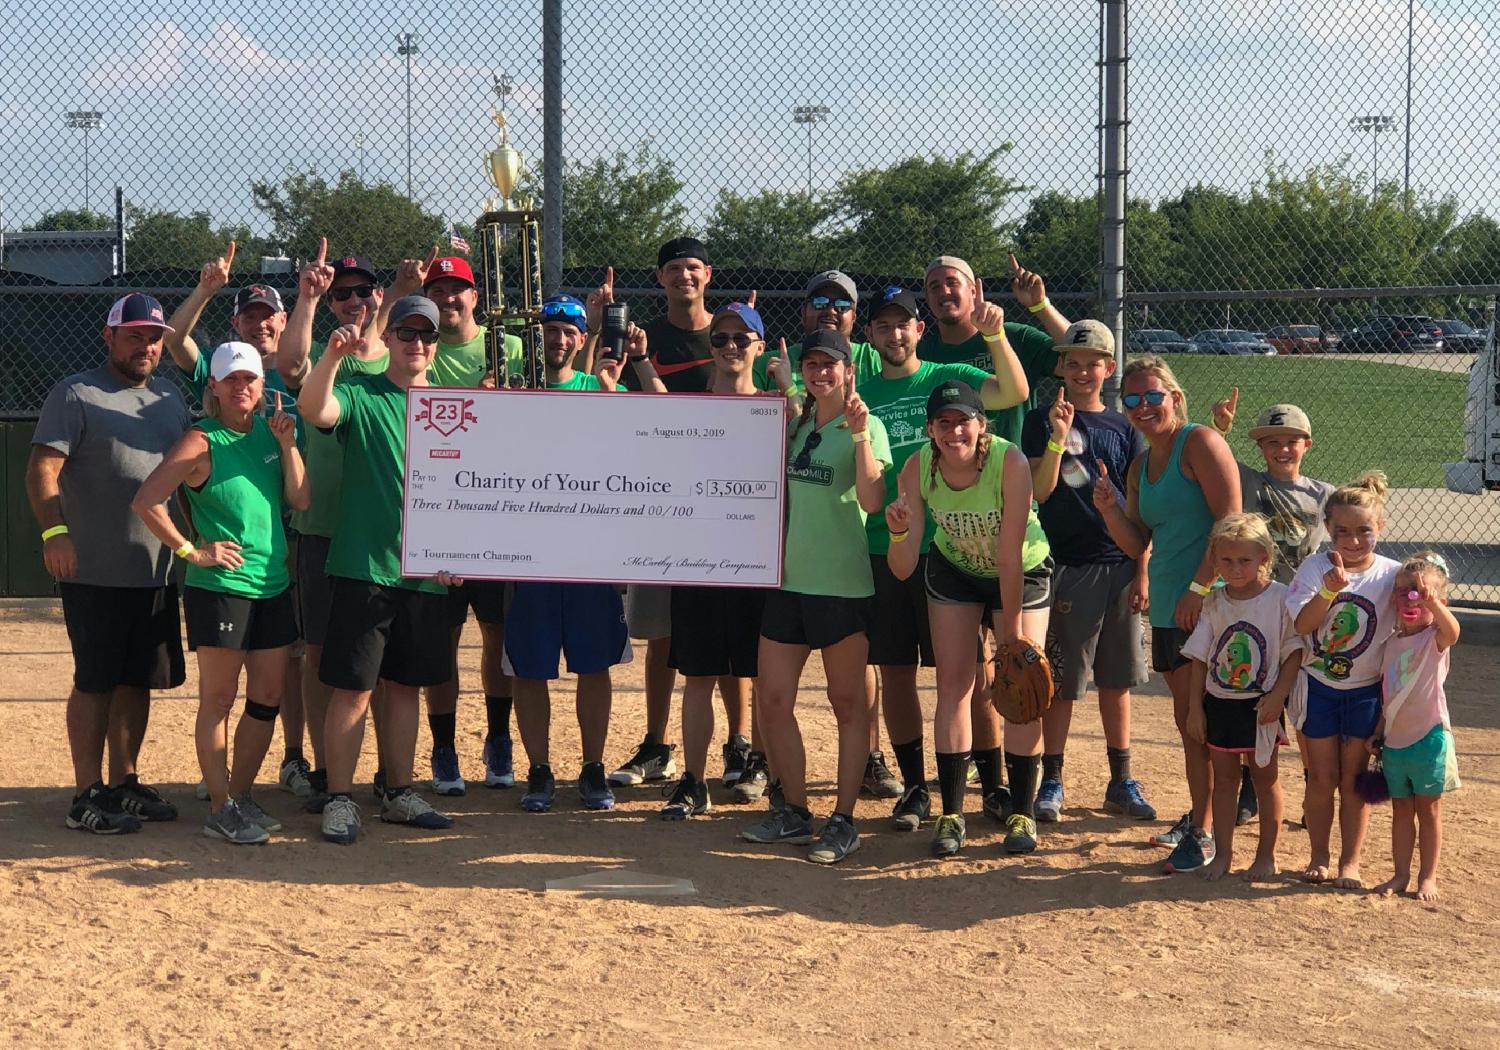 The St. Louis team celebrating their softball tournament win which raised $3,500 for Friends of Children with Cancer.